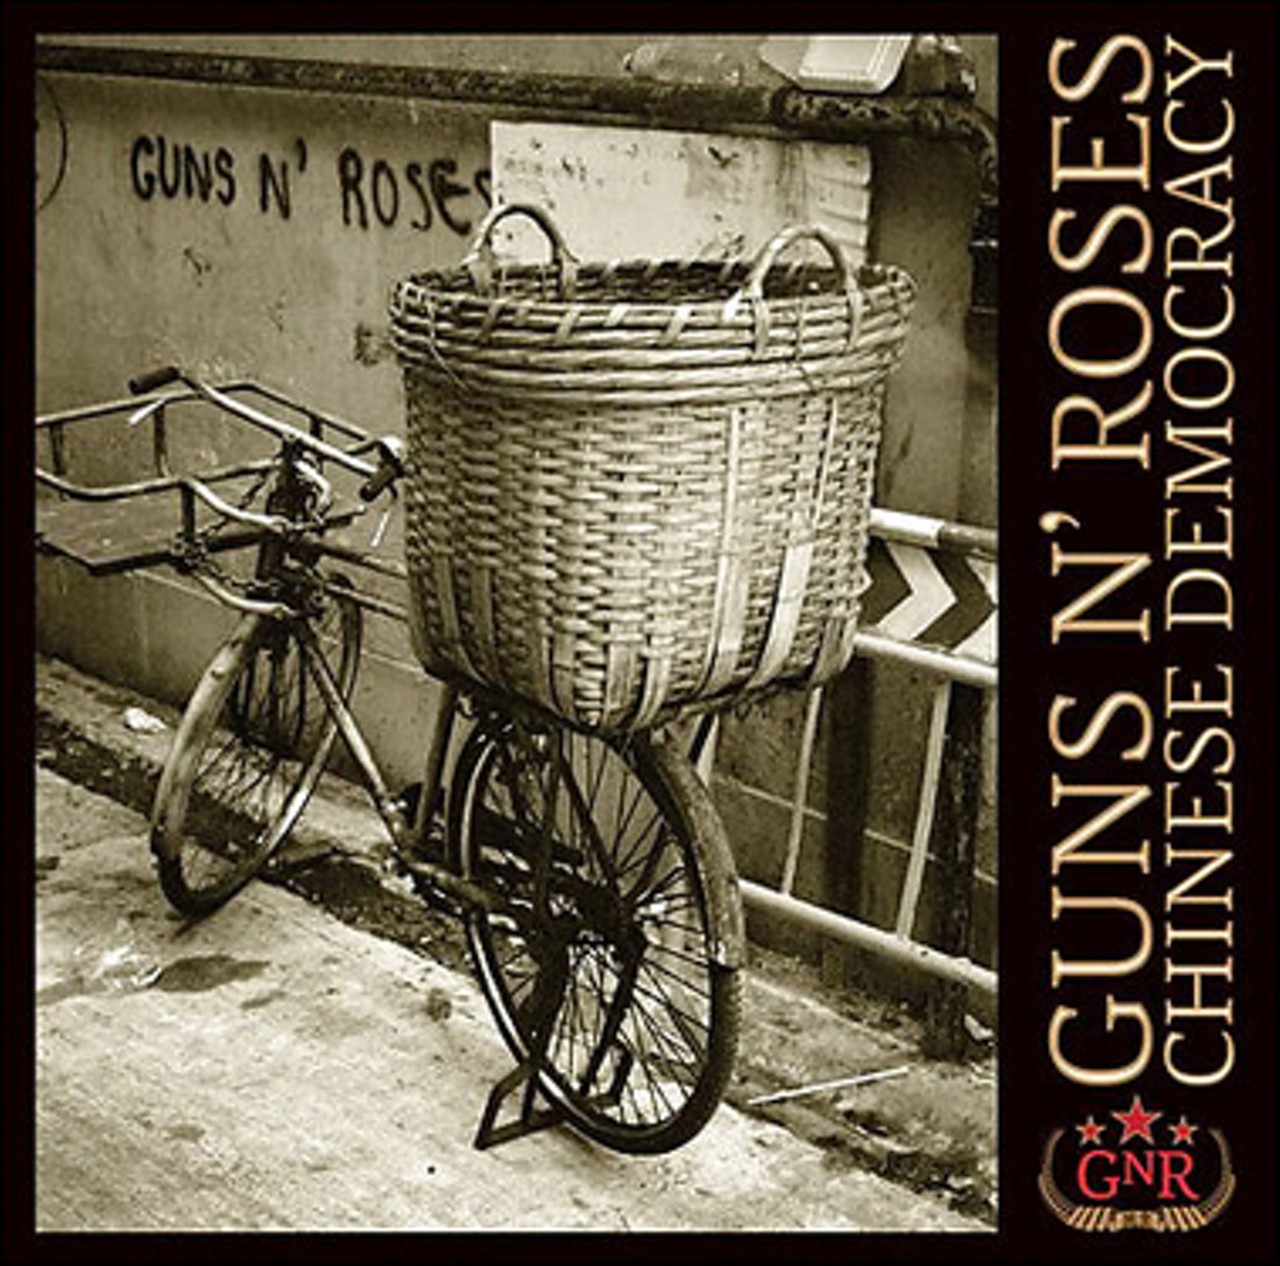 Guns N Roses - Chinese Democracy
All that wait for dedicated GNR fans resulted in this piece? An easy choice for the former metal head in your family, but they will likely resell it before 2009.